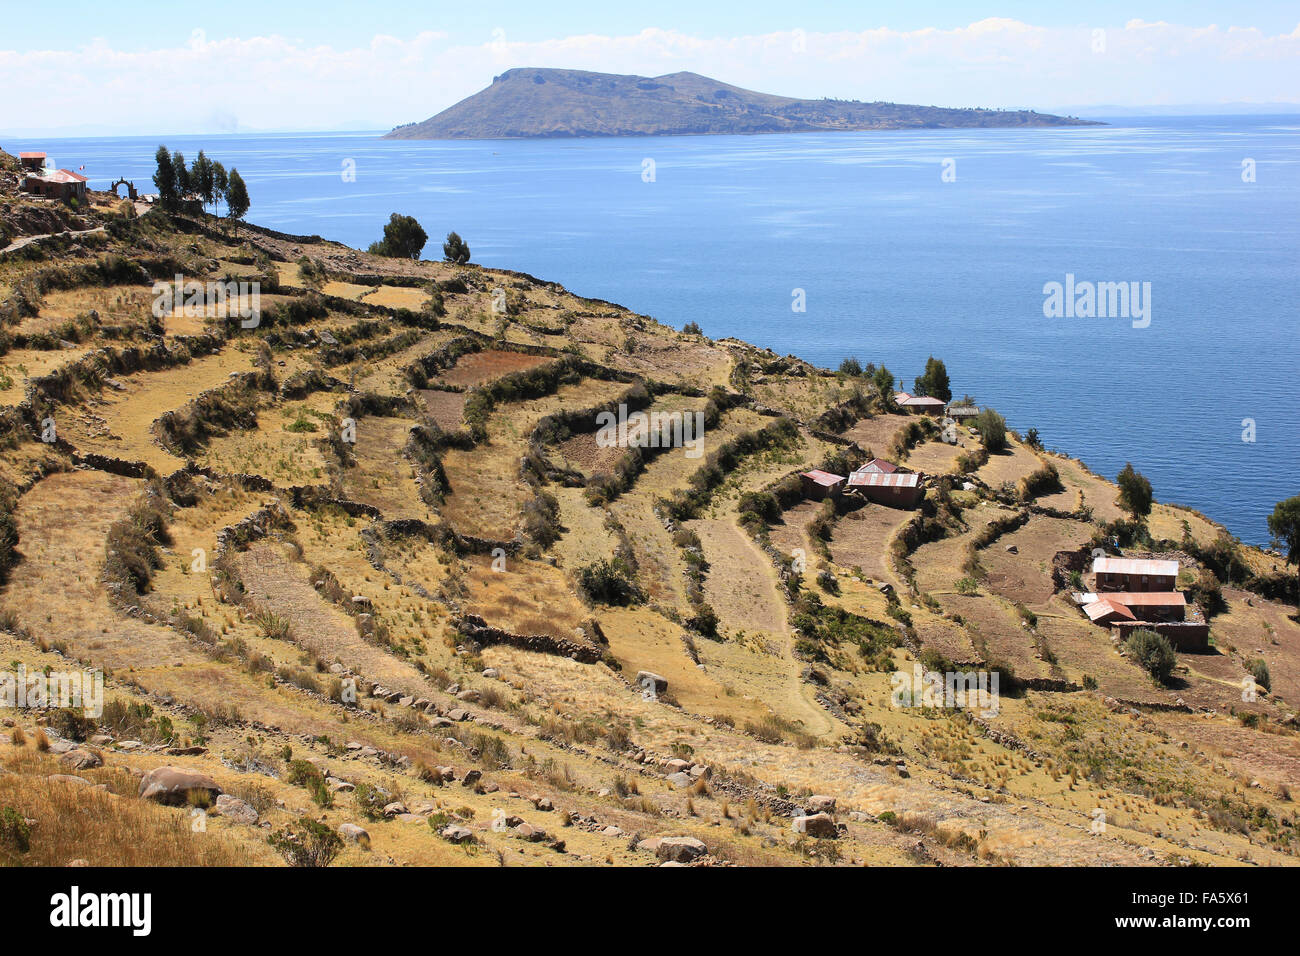 Terraced Fields On Taquile Island, Lake Titicaca Stock Photo